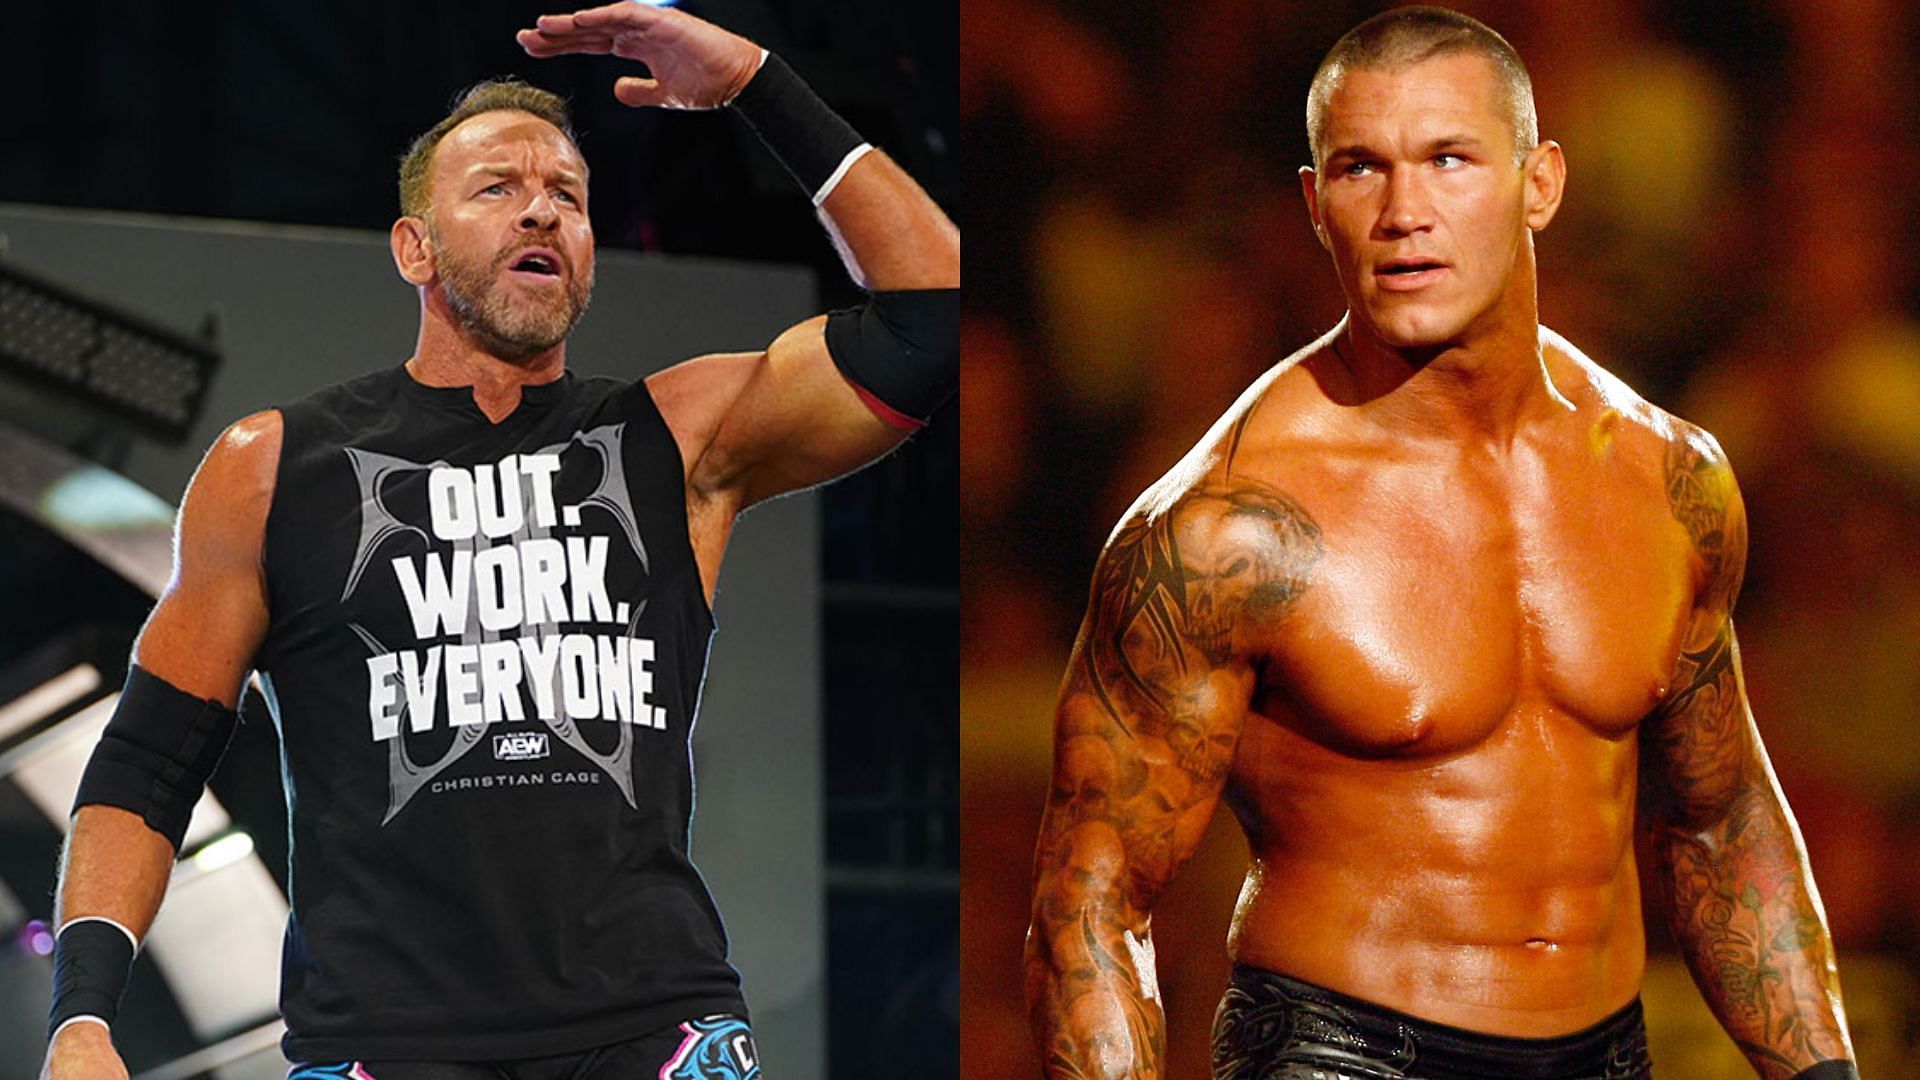 Could one of these stars someday provide a window for Randy Orton to debut in AEW?